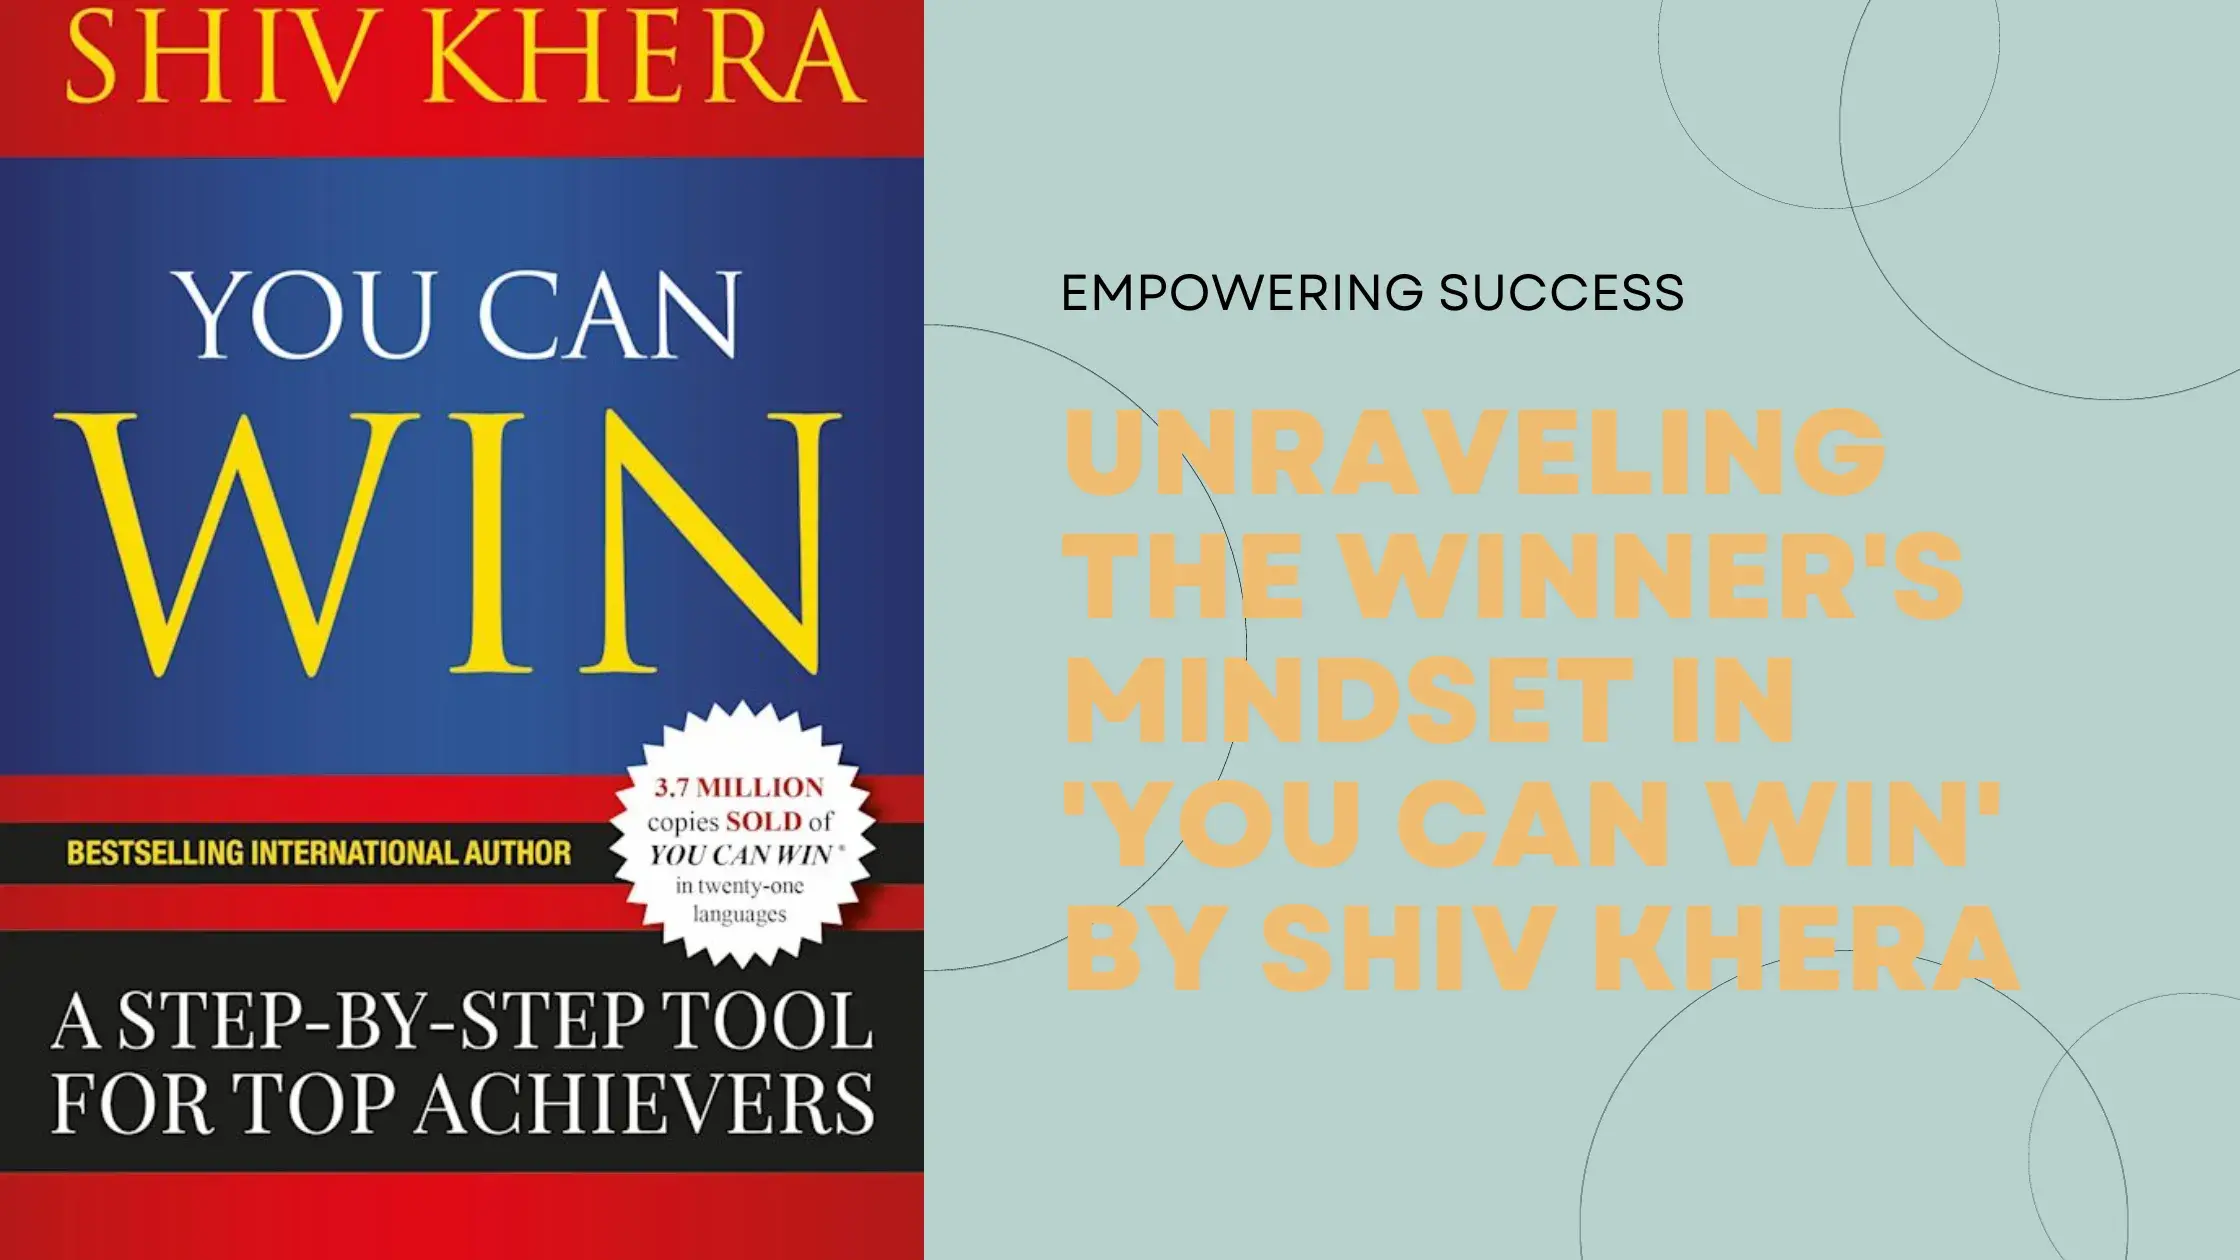 Empowering Success: Unraveling the Winner's Mindset in 'You Can Win' by Shiv Khera